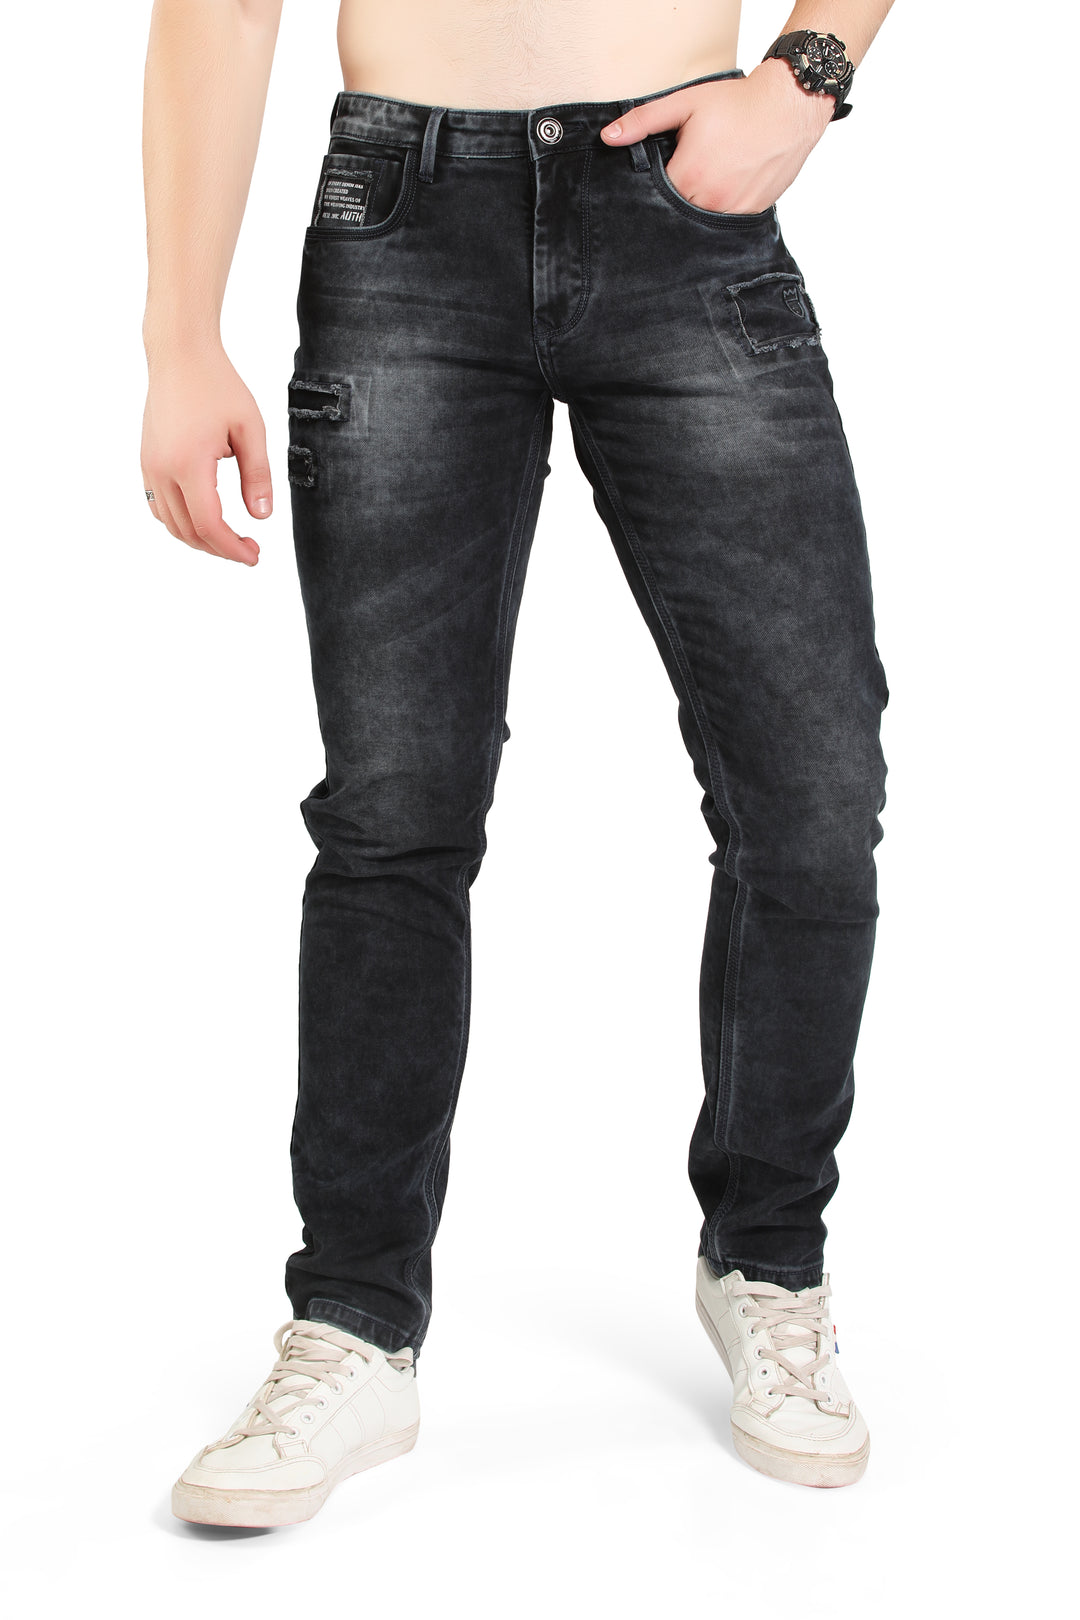 BLACKTREE MEN'S PATCHED RIPPED SLIM STRETCH JEANS BT0017..